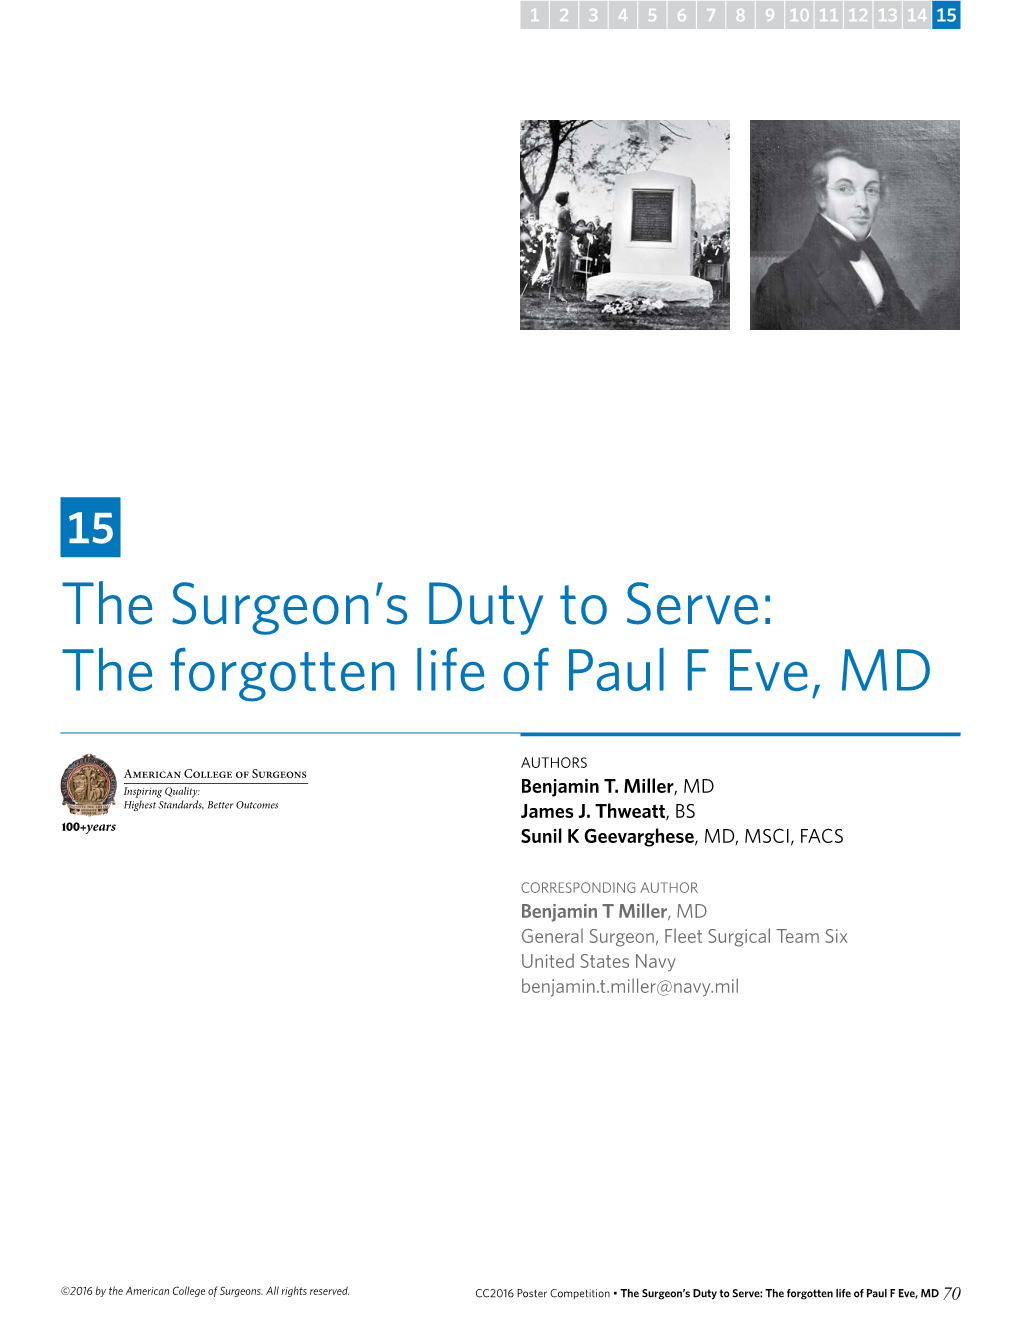 The Surgeon's Duty to Serve: the Forgotten Life of Paul F Eve, MD